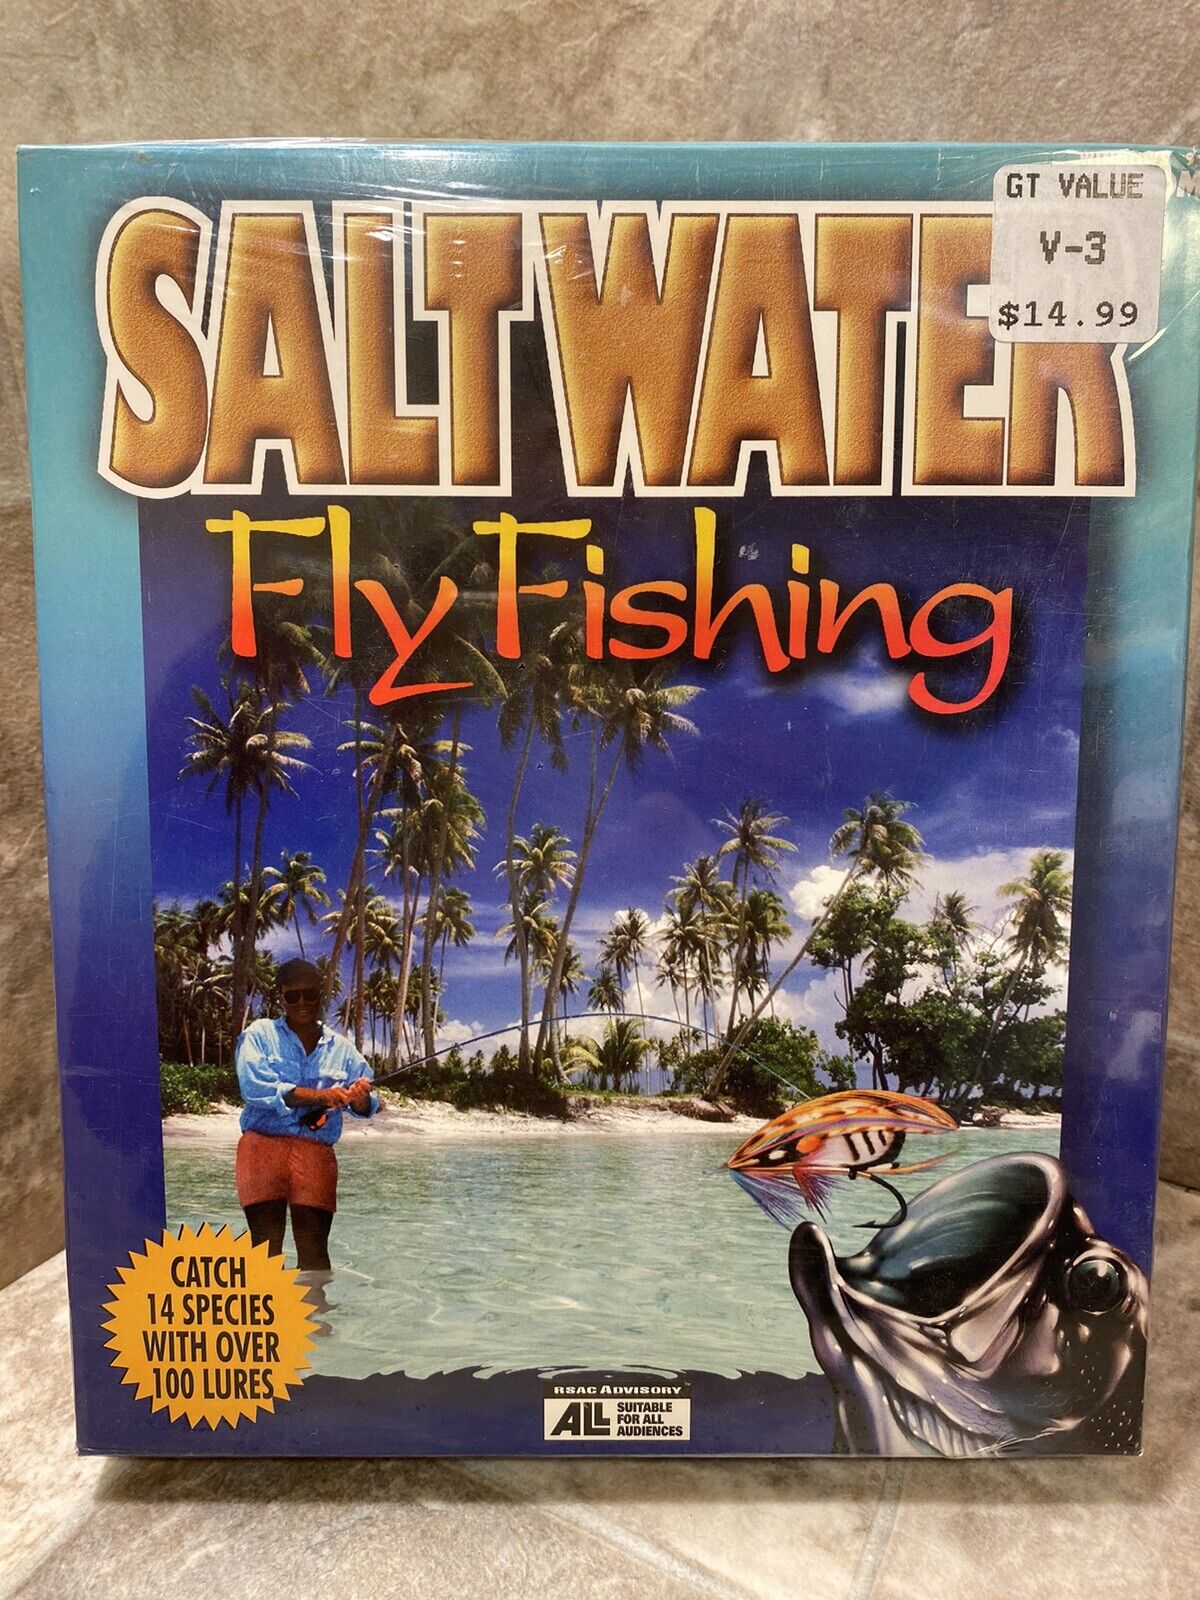 ValuSoft -Saltwater Fly Fishing CD-ROM -PC Simulation Sports Fishing Game –New